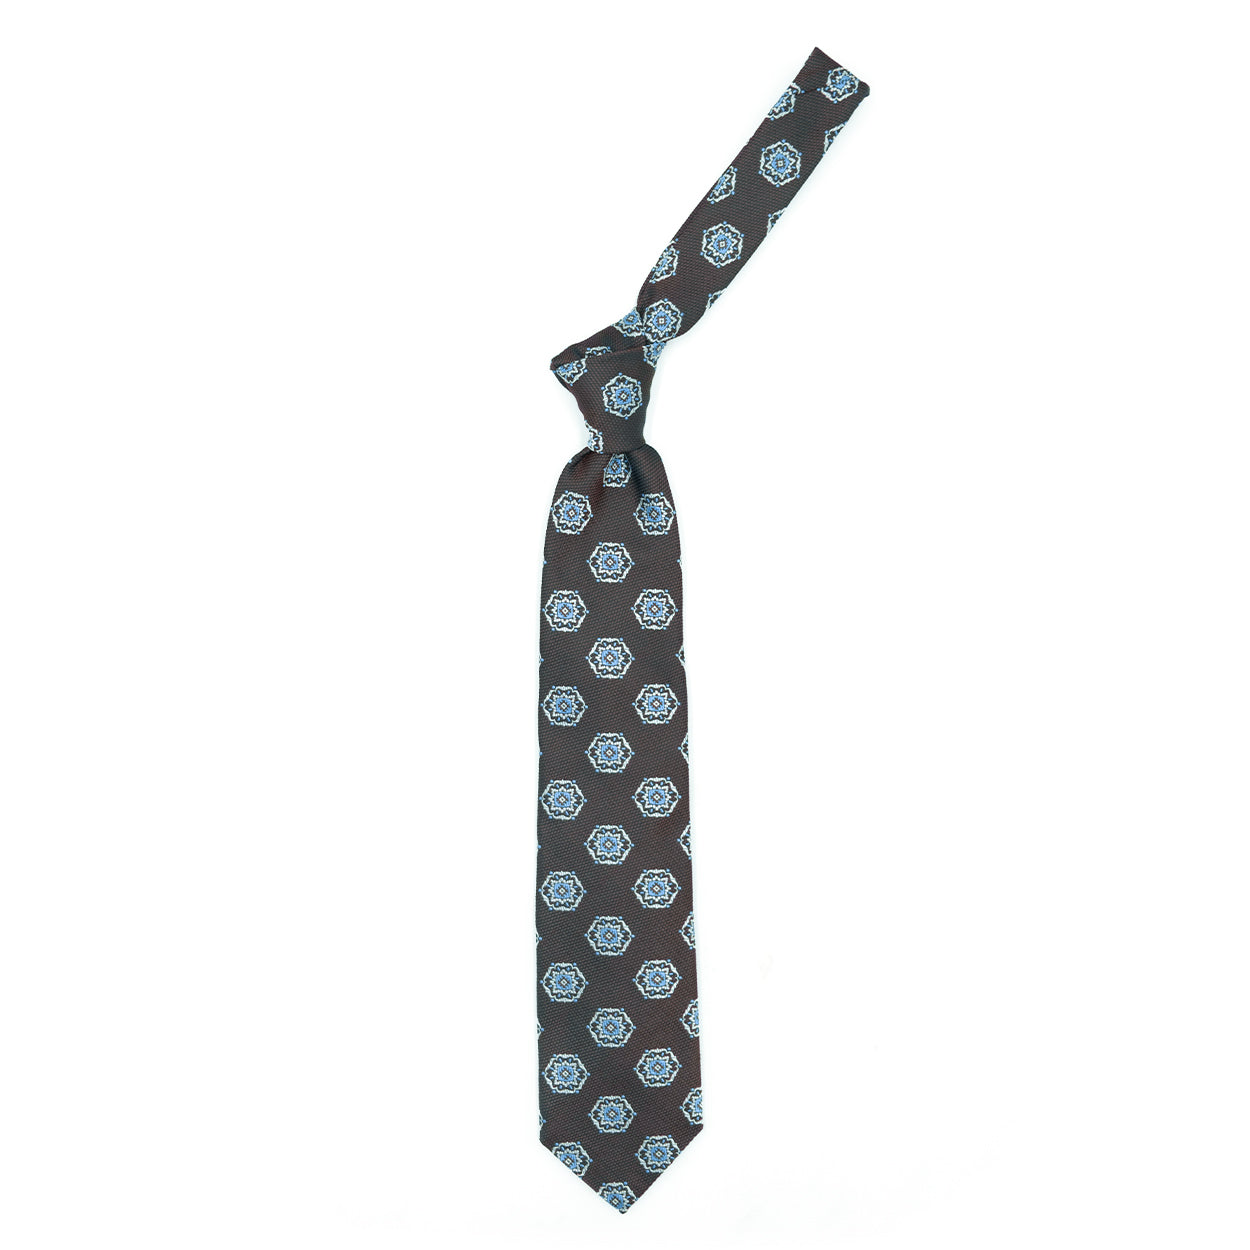 Brown tie with white and blue medallions